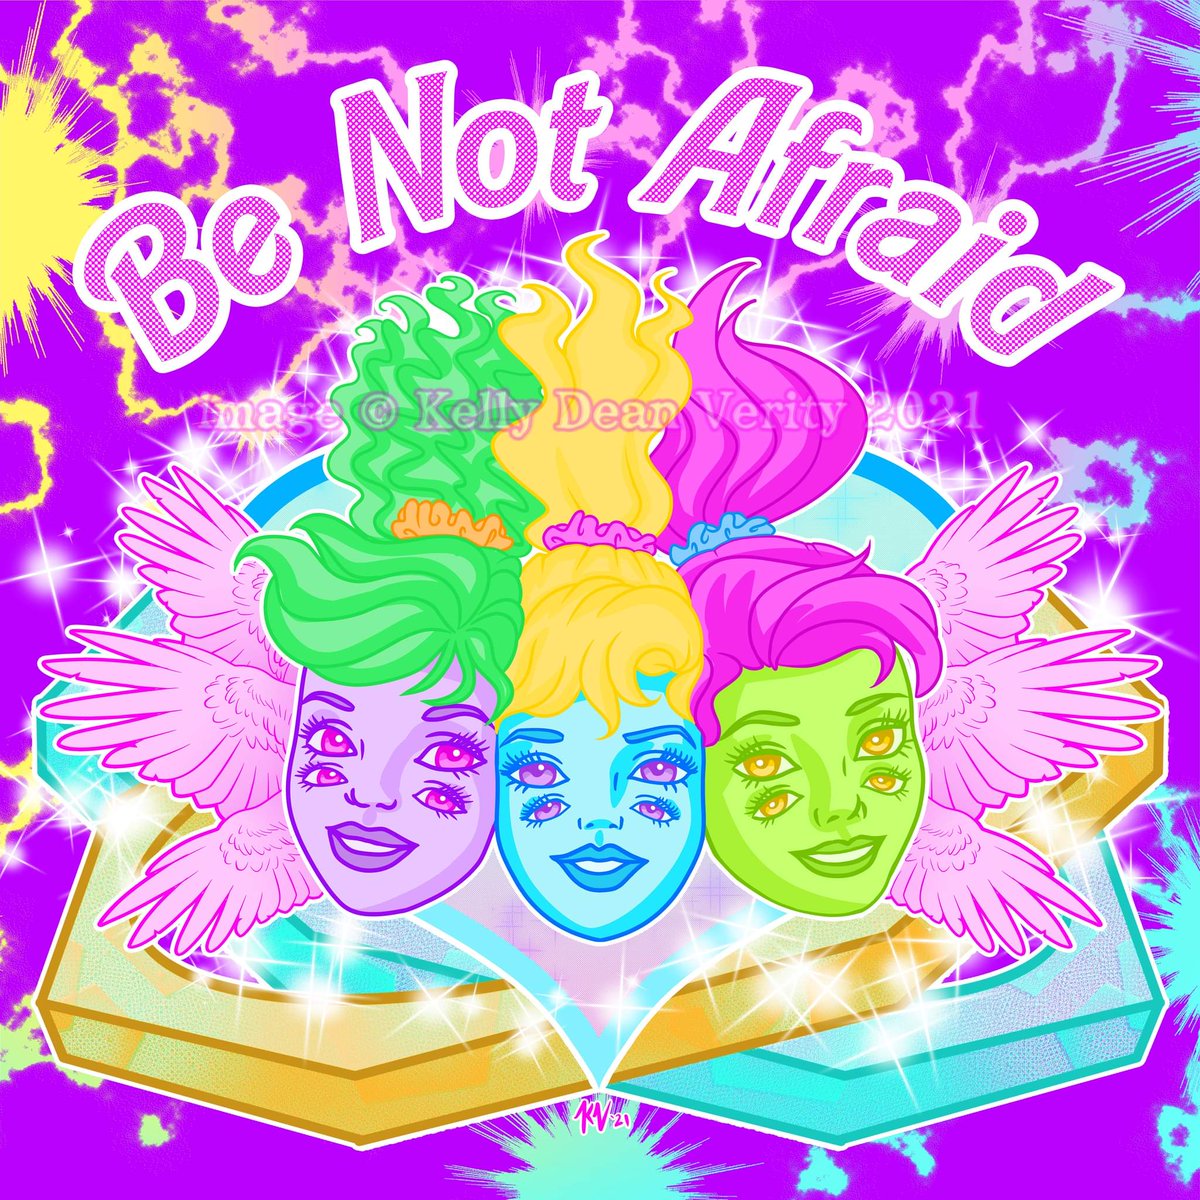 Catching up on art I forgot to post to Twitter.
'Be Not Afraid Barbie'
#Angels #barbieaesthetic #barbie #lisafrankaesthetic